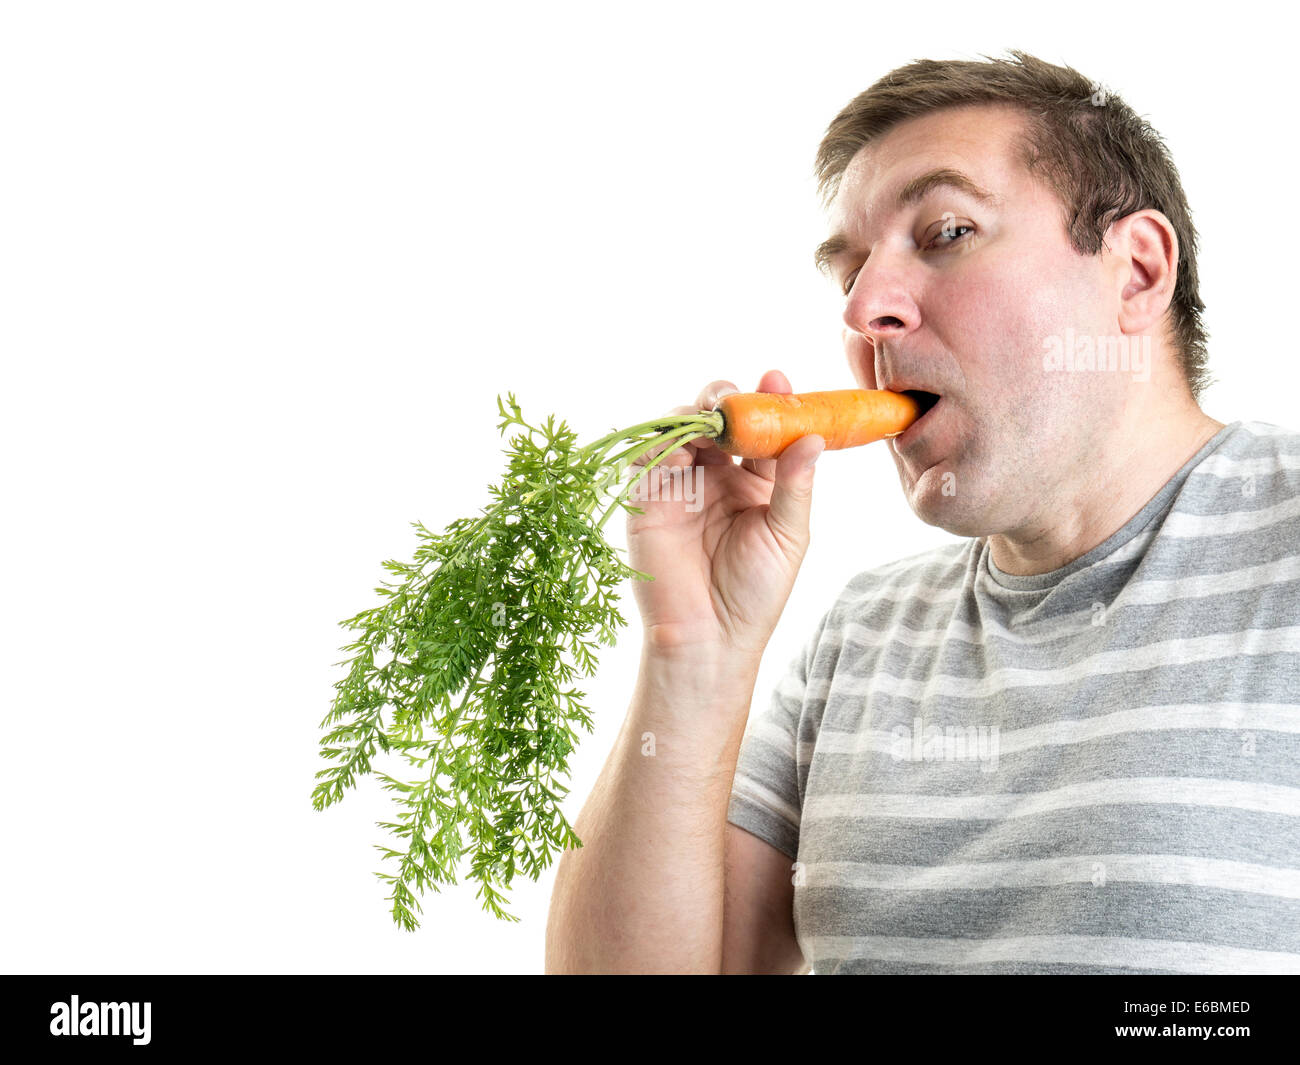 Man holding a fresh carrot in his mouth Stock Photo